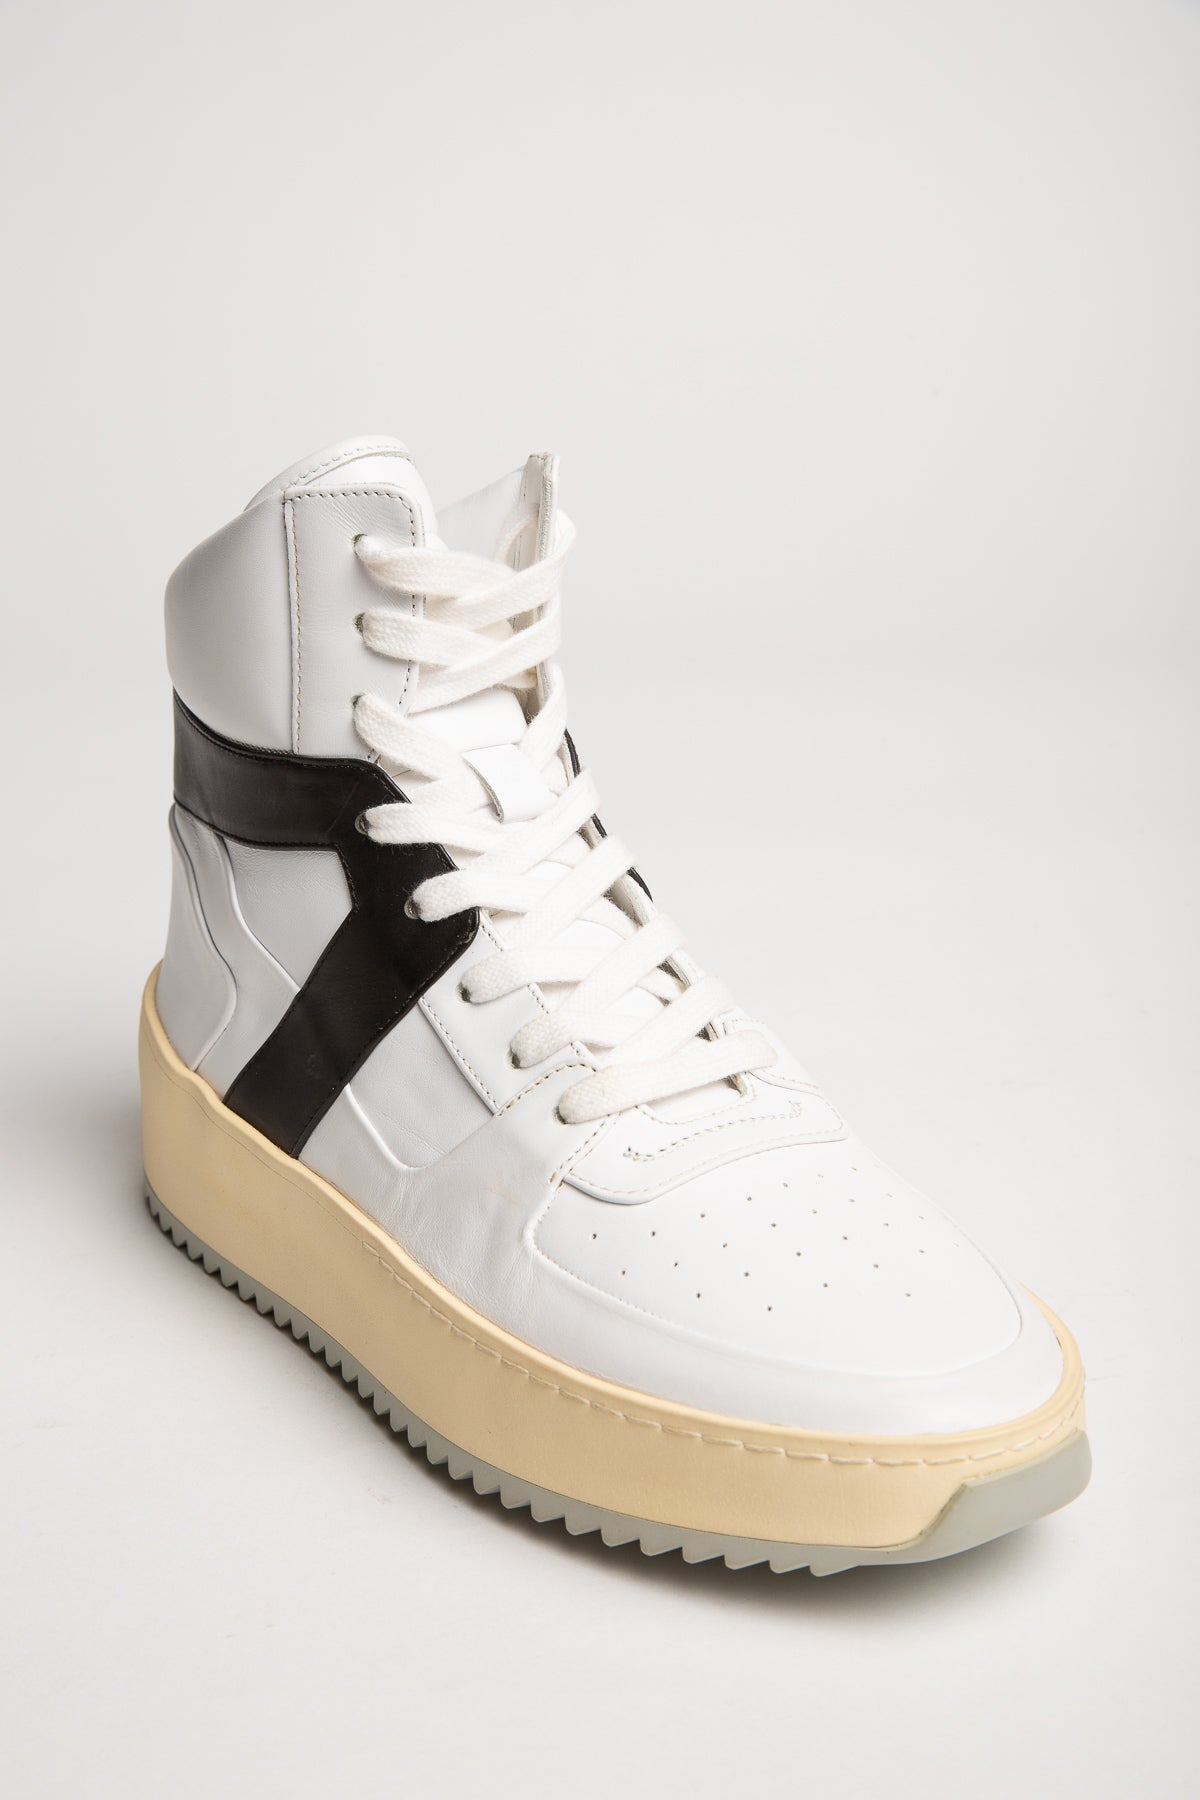 FEAR OF GOD | BASKETBALL SNEAKERS